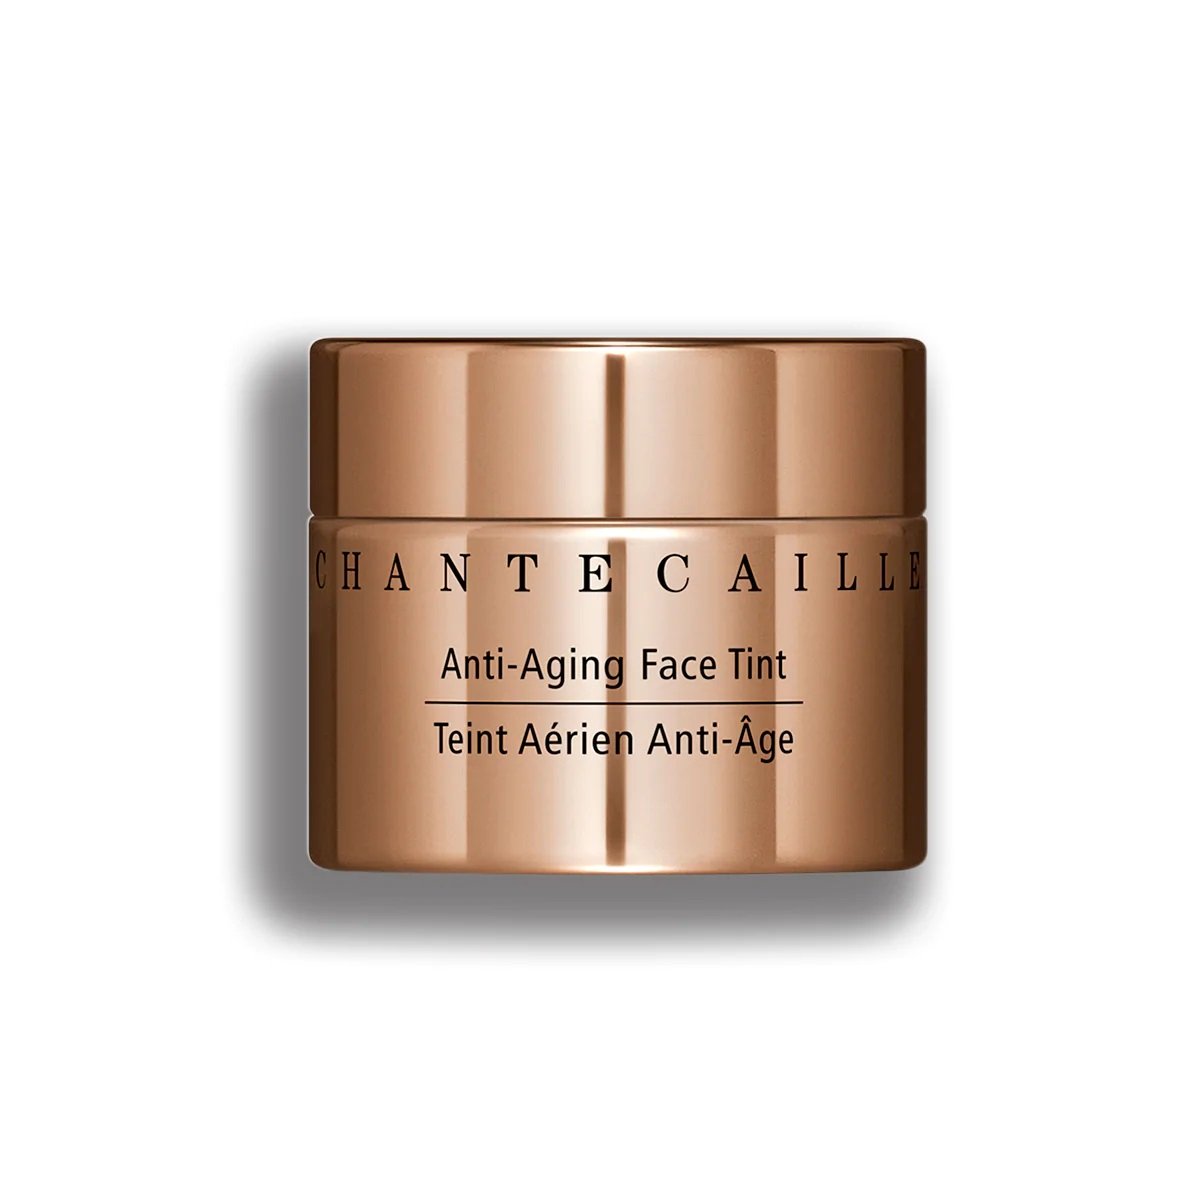 Chantecaille Anti-Aging Face Tint Sheer Bronze Review